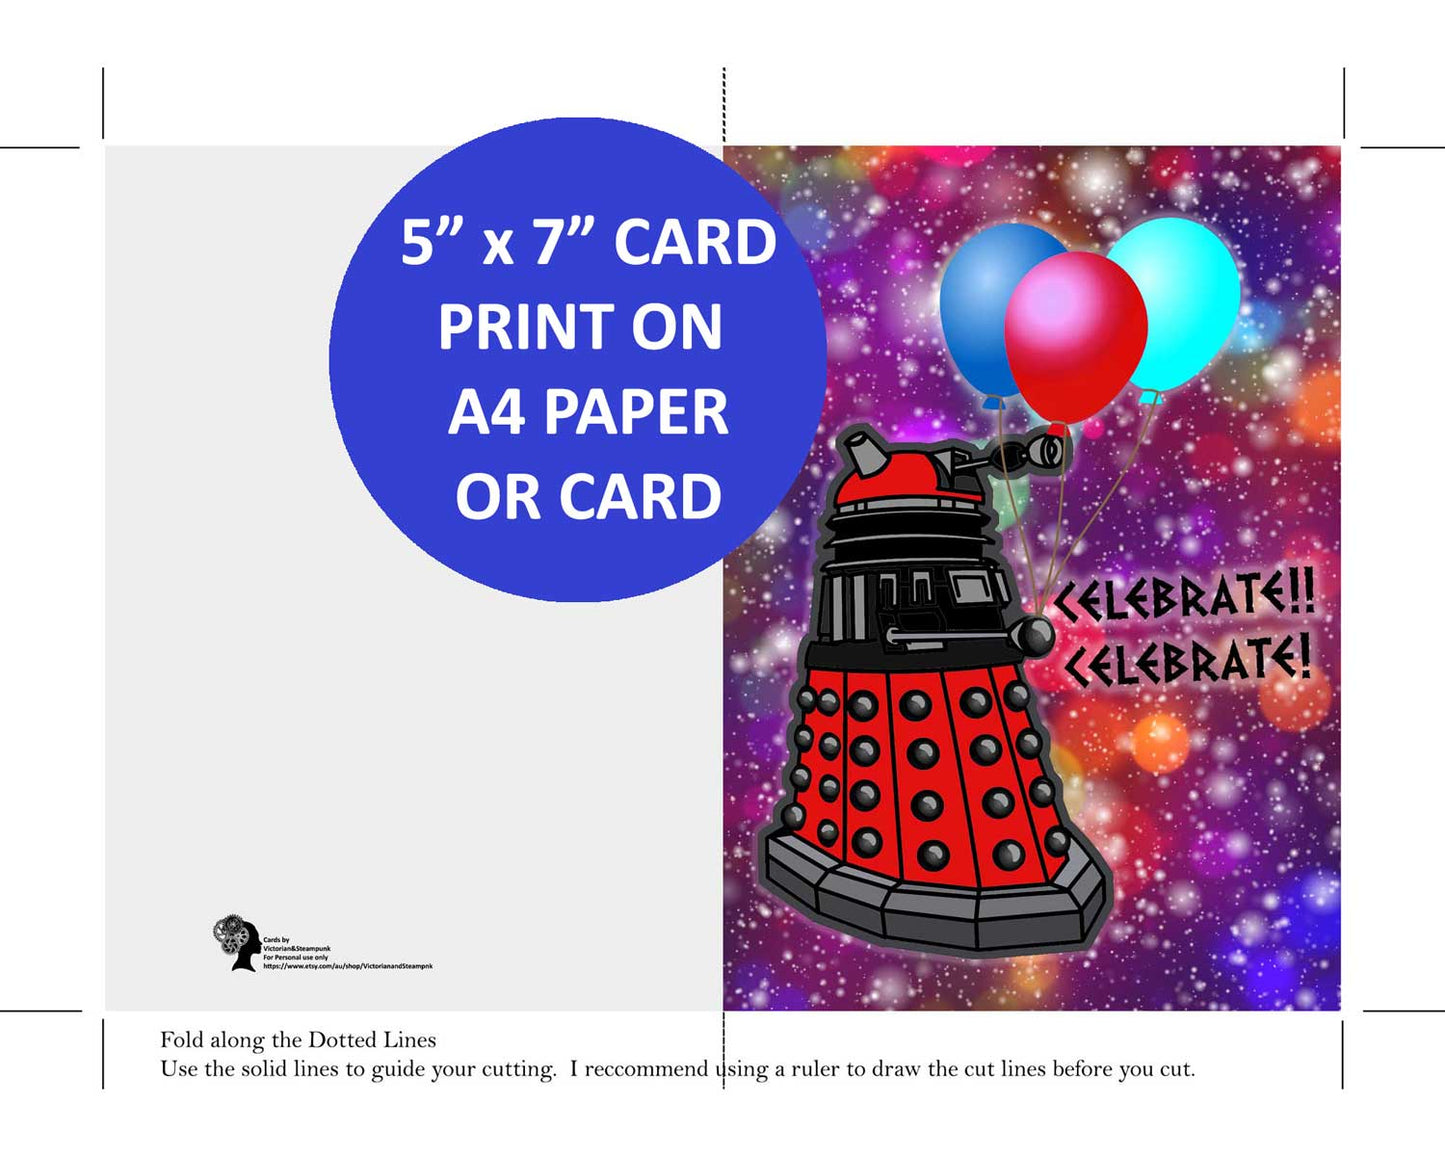 Dalek birthday card instructions for card size to print on